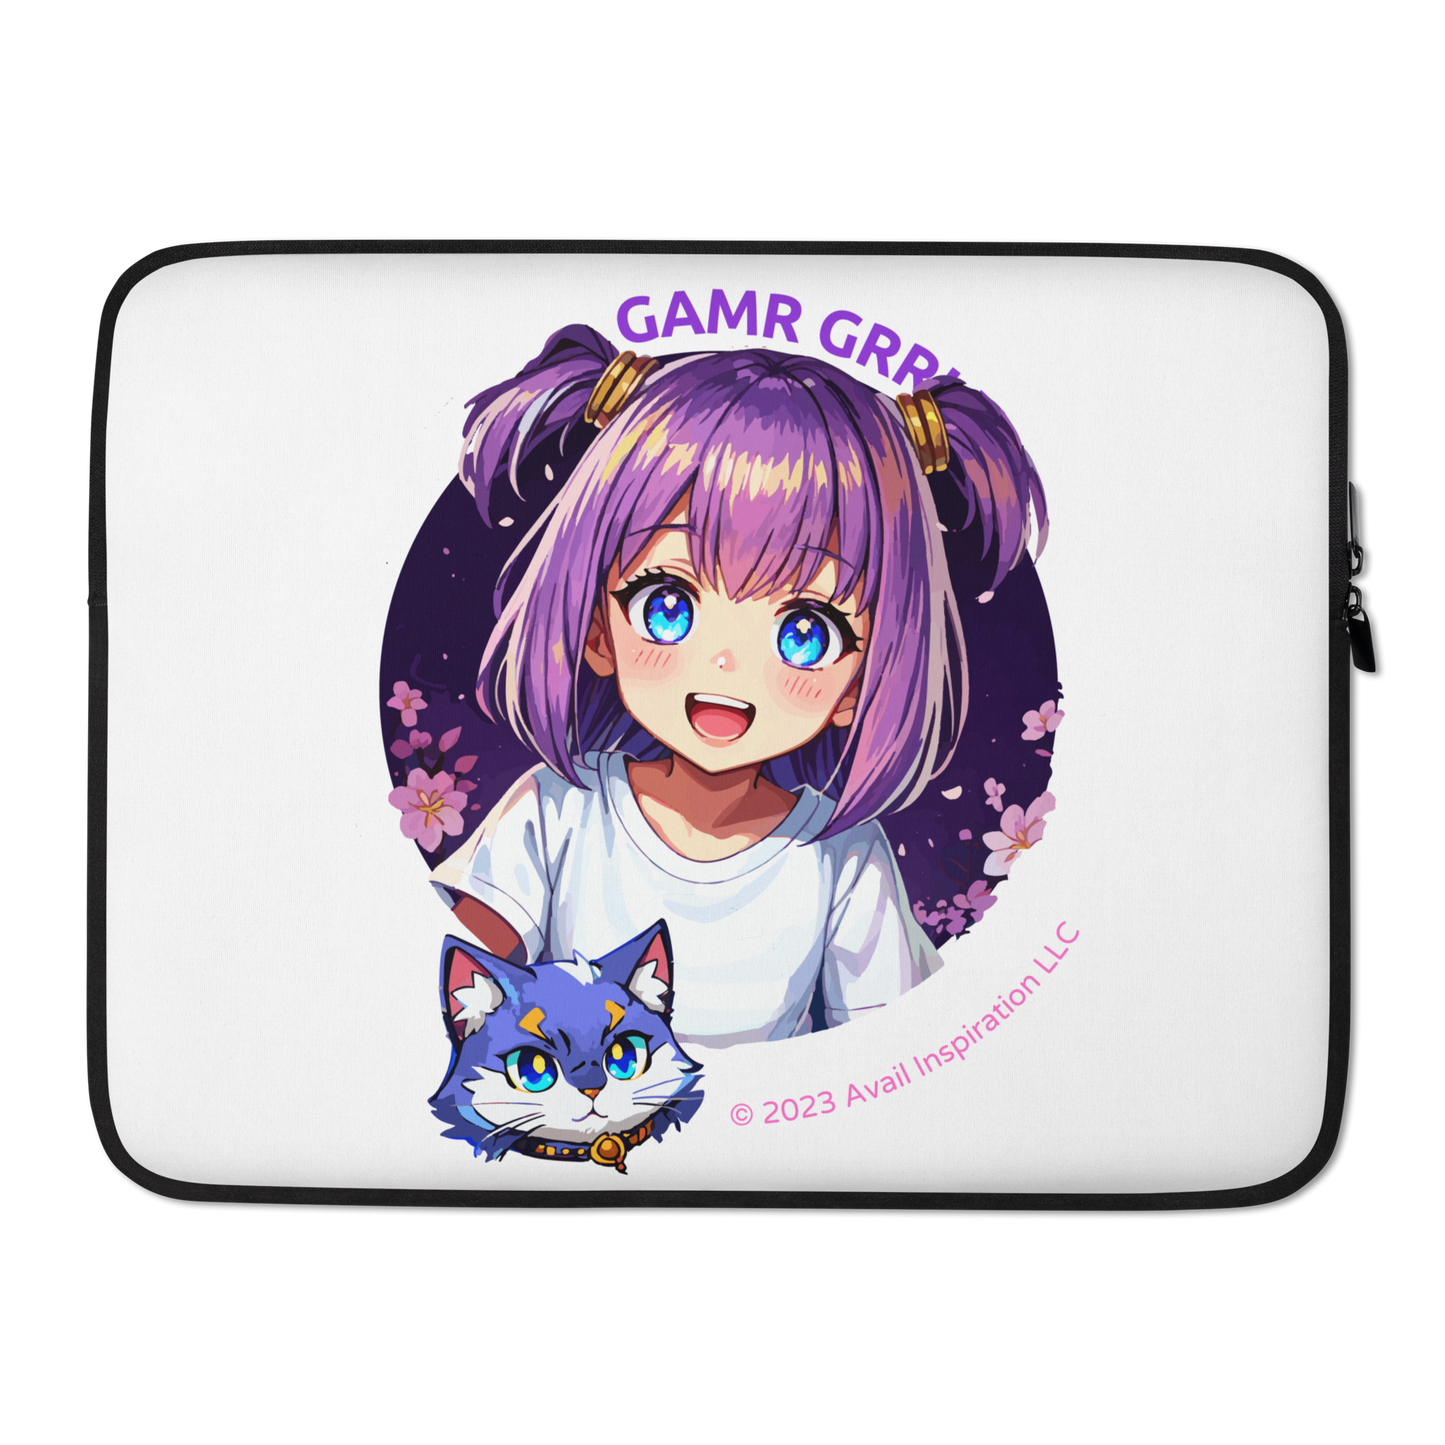 Anime Collection Laptop Sleeve